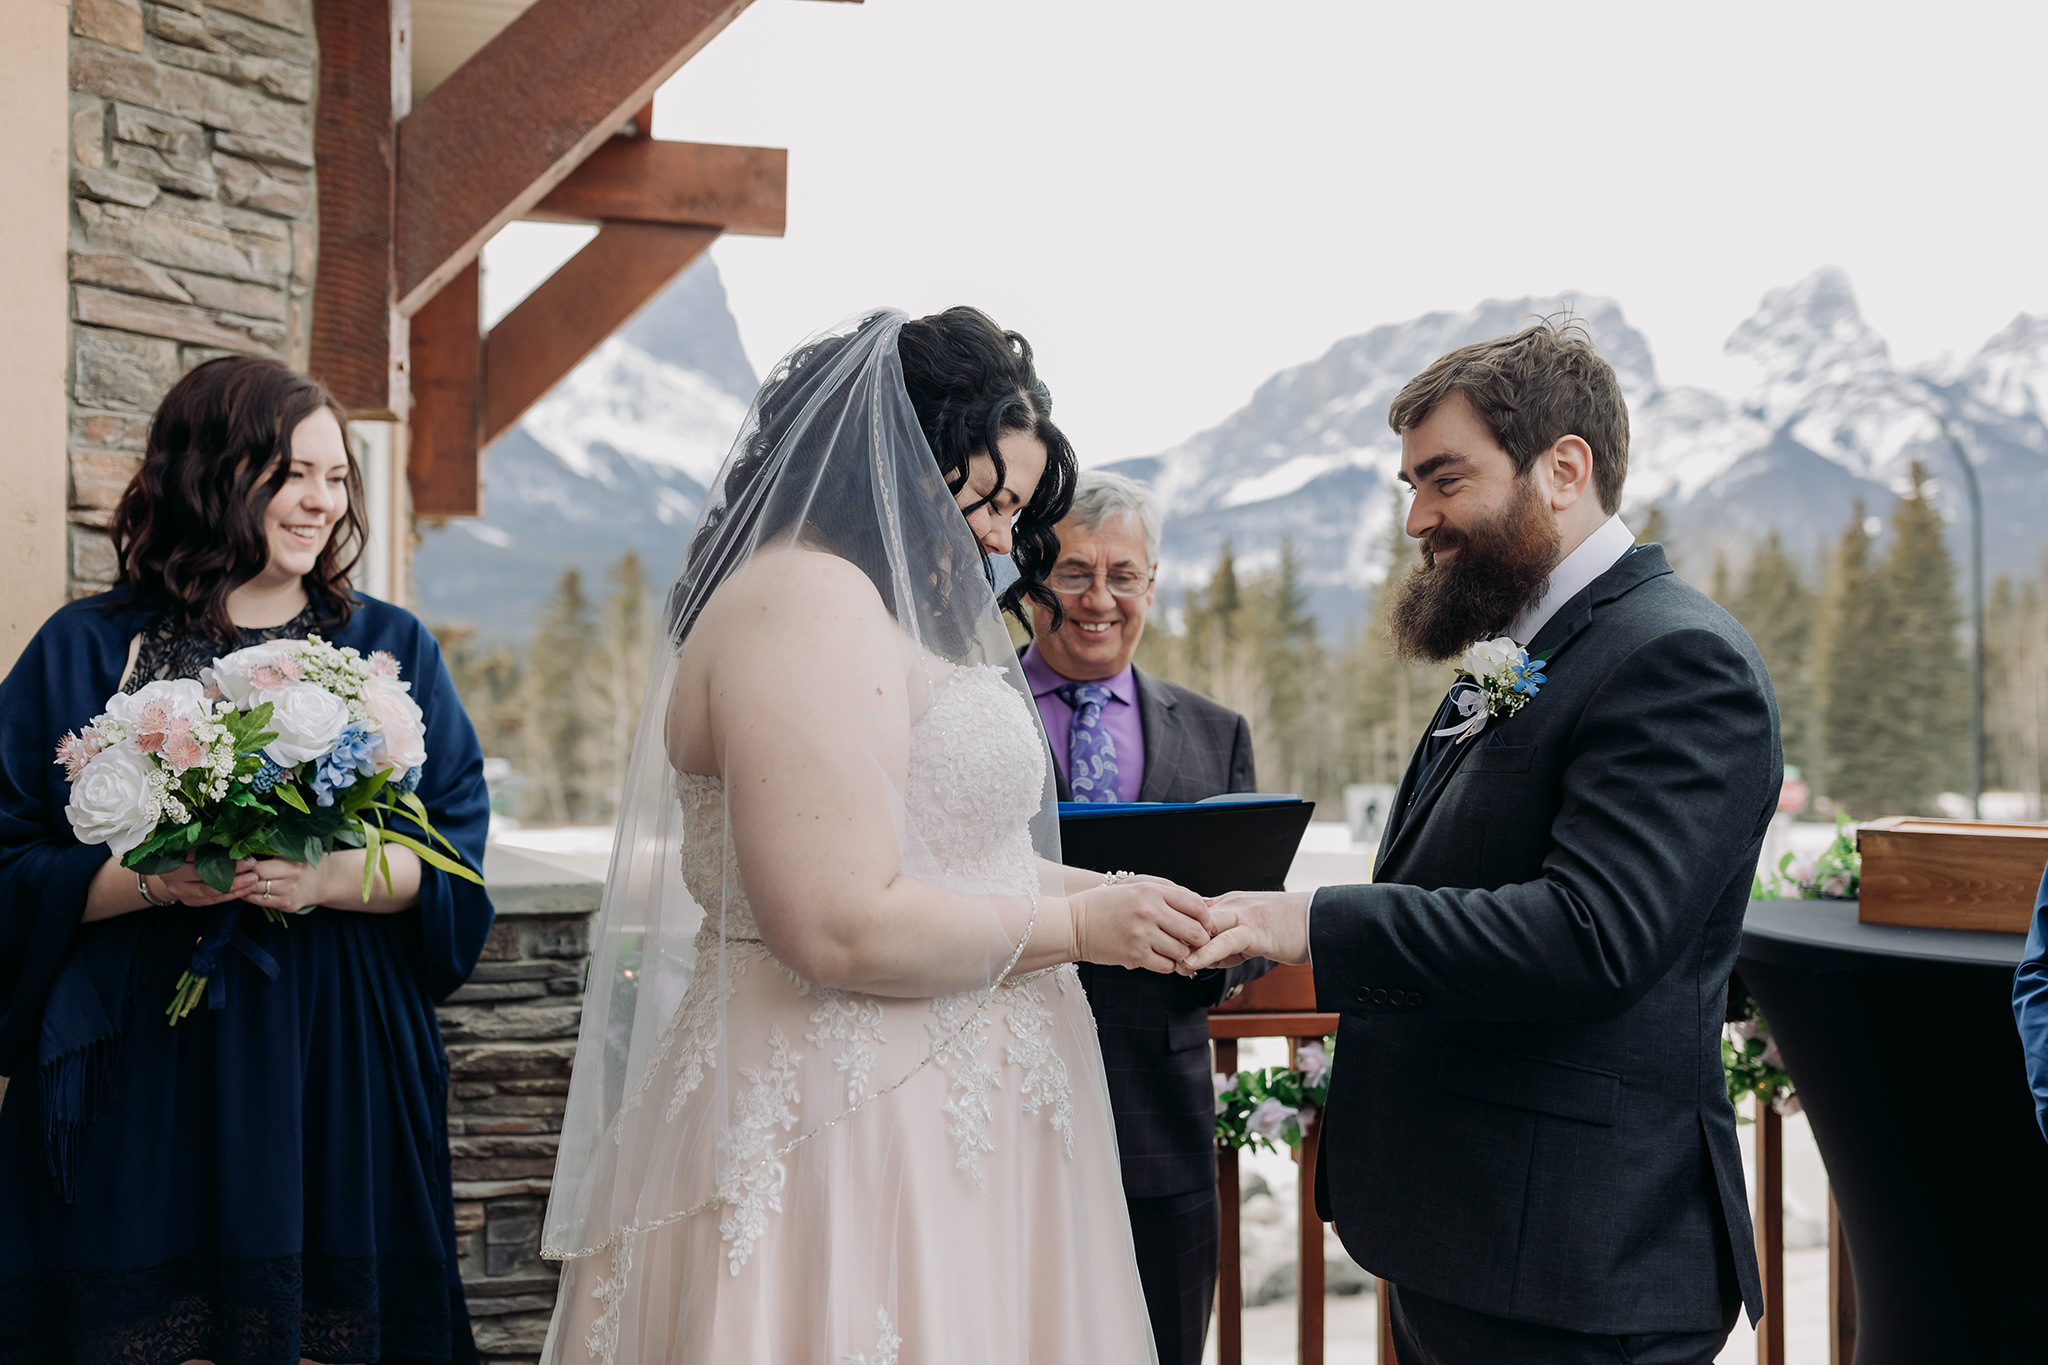 Falcon Crest Lodge wedding Canmore winter wedding ceremony outdoors terrace